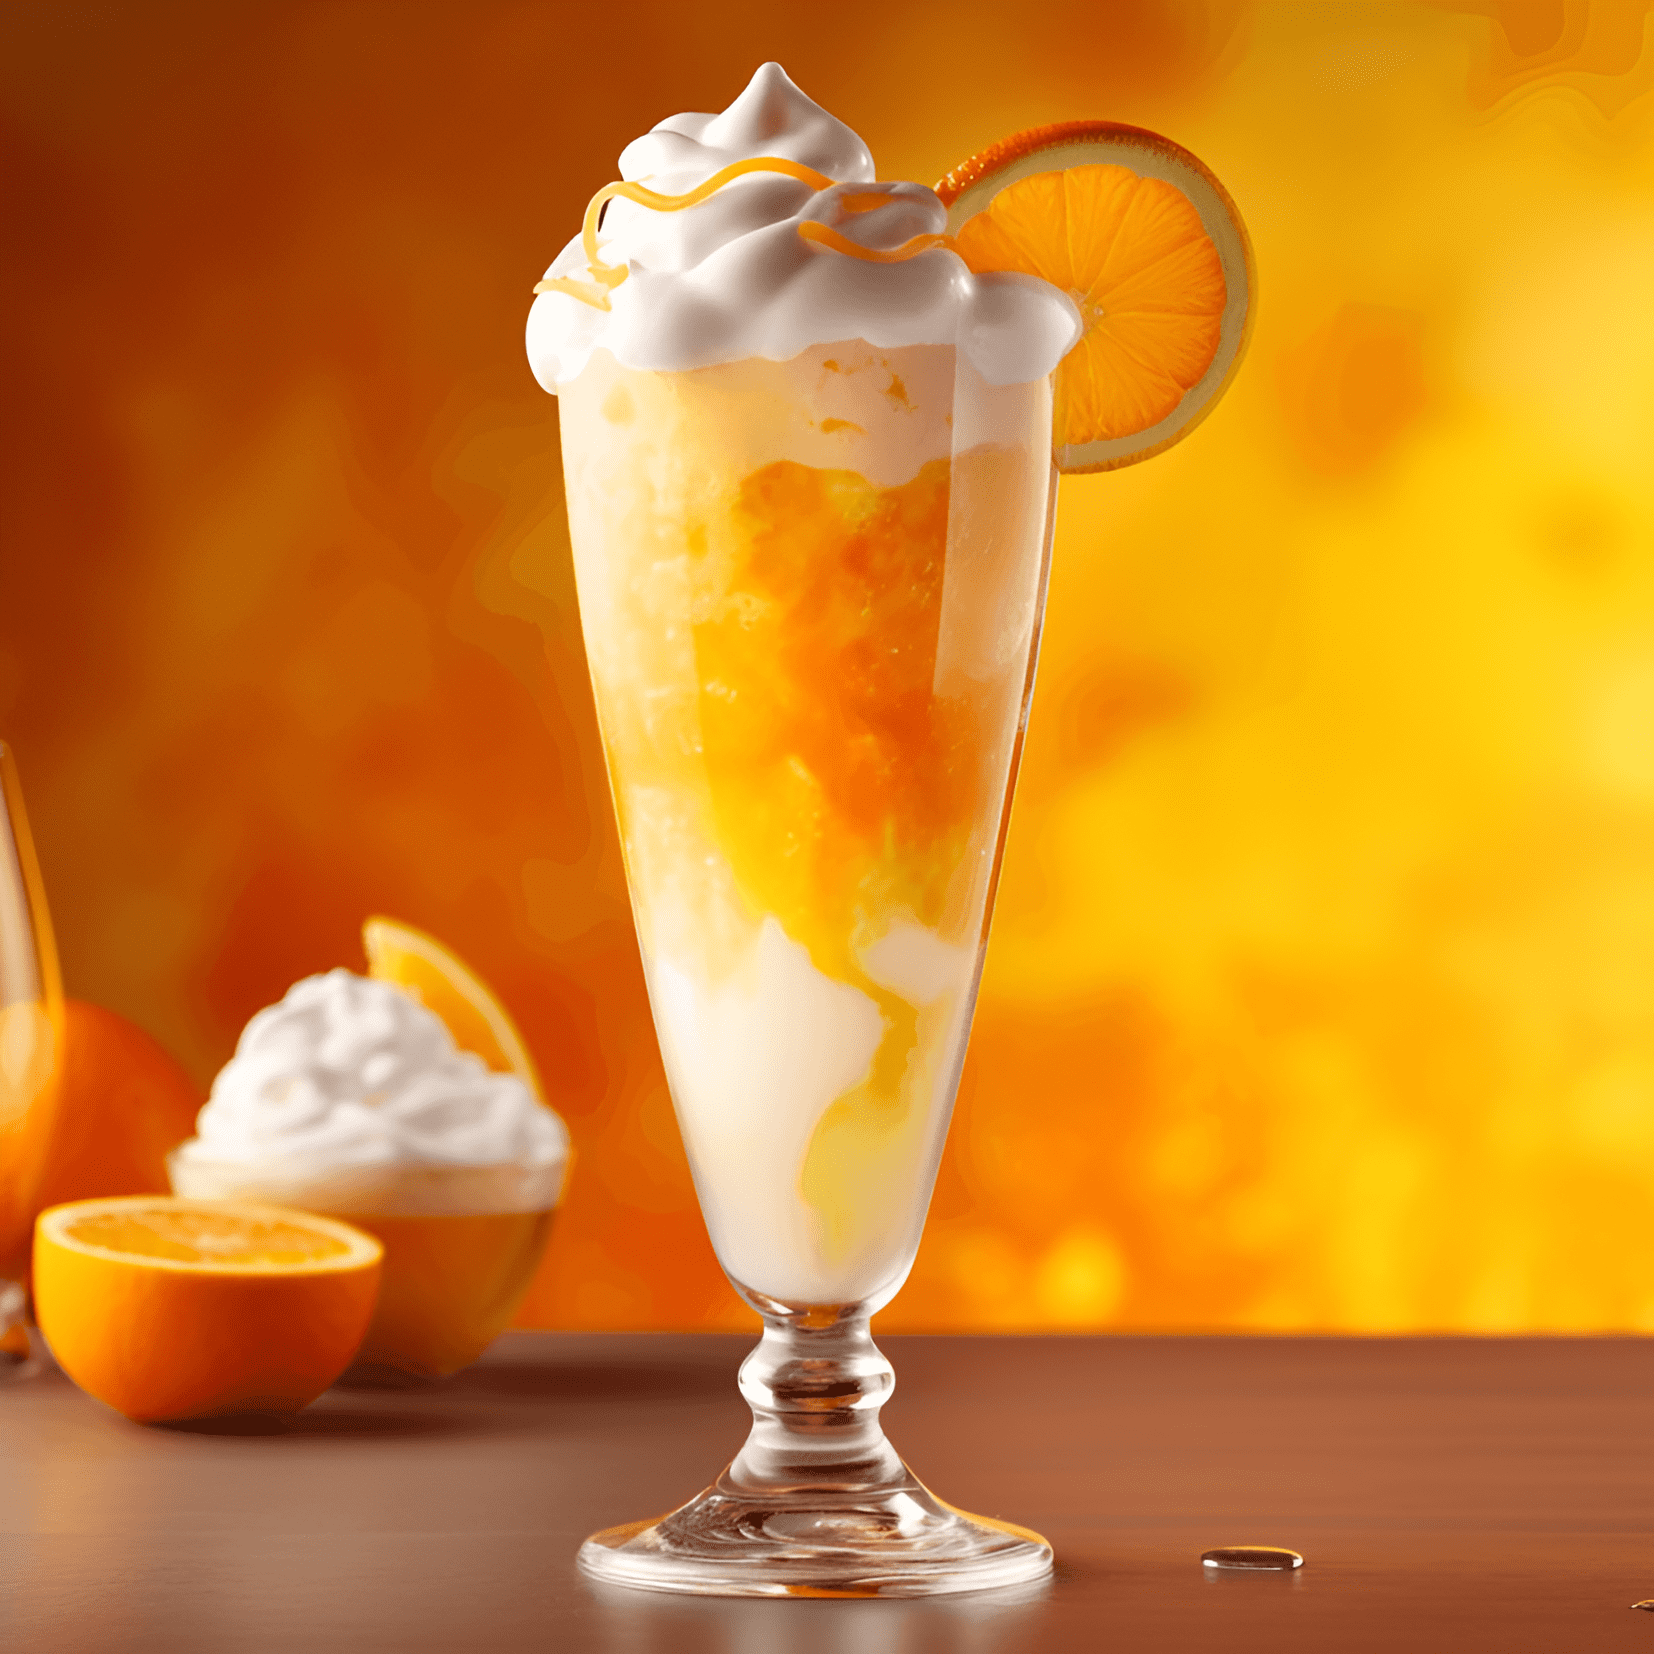 Dreamsicle Cocktail Recipe - The Dreamsicle cocktail is a sweet, creamy, and refreshing drink with a hint of tanginess from the orange. It is well-balanced, with a smooth and velvety texture that leaves a pleasant aftertaste.